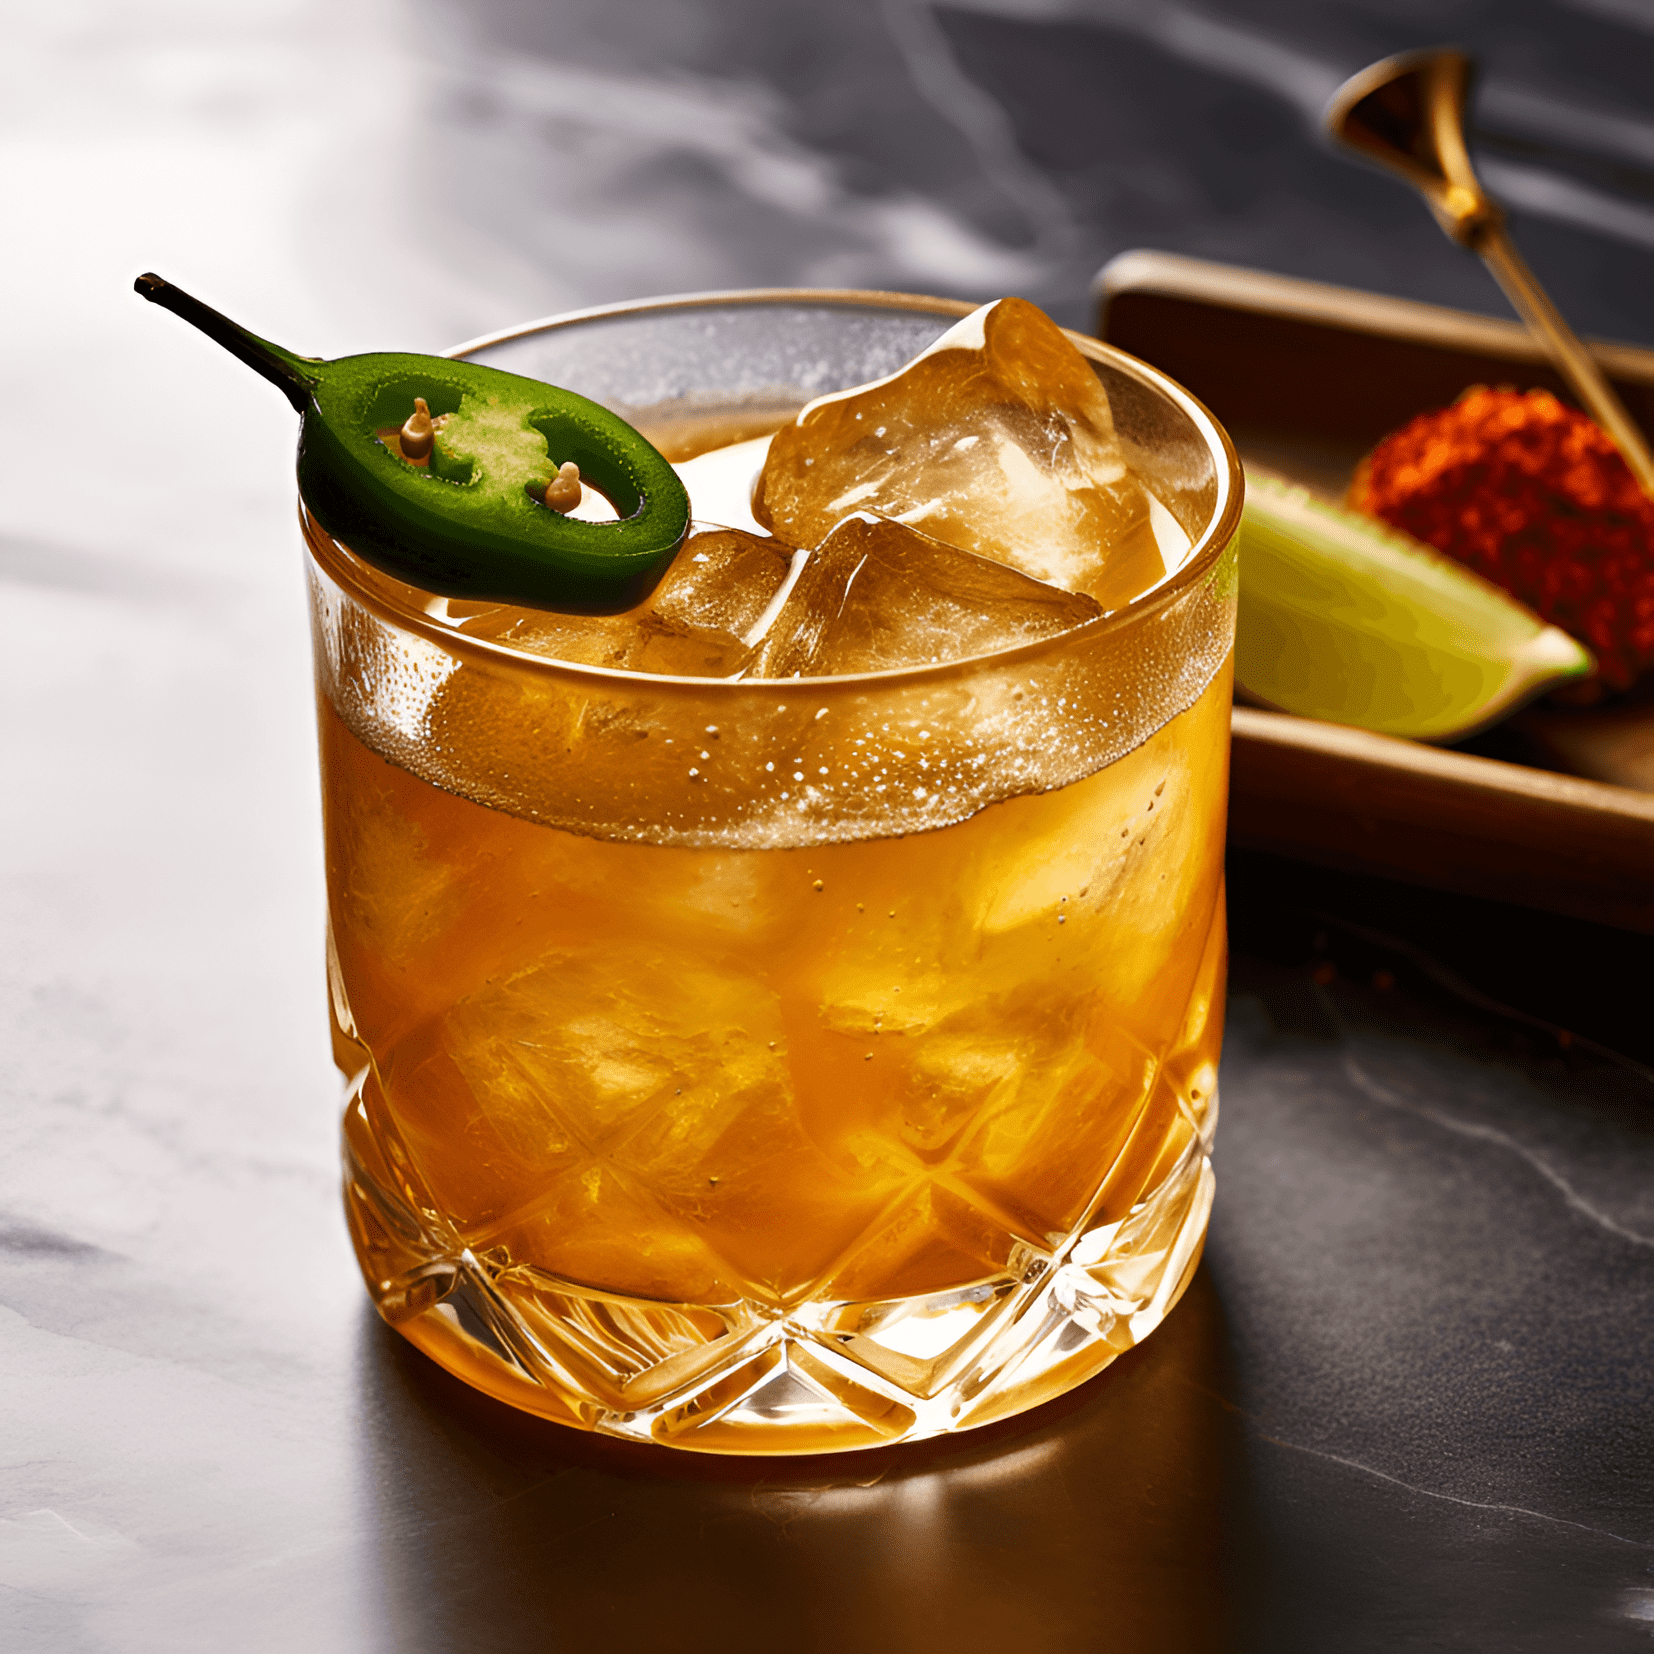 Rodeo Cocktail Recipe - The Rodeo cocktail is a complex and exciting mix of flavors. It is spicy, smoky, and slightly sweet with a hint of citrus. The heat from the jalapeño is balanced by the sweetness of the agave syrup, while the smokiness of the mezcal adds depth and intrigue.